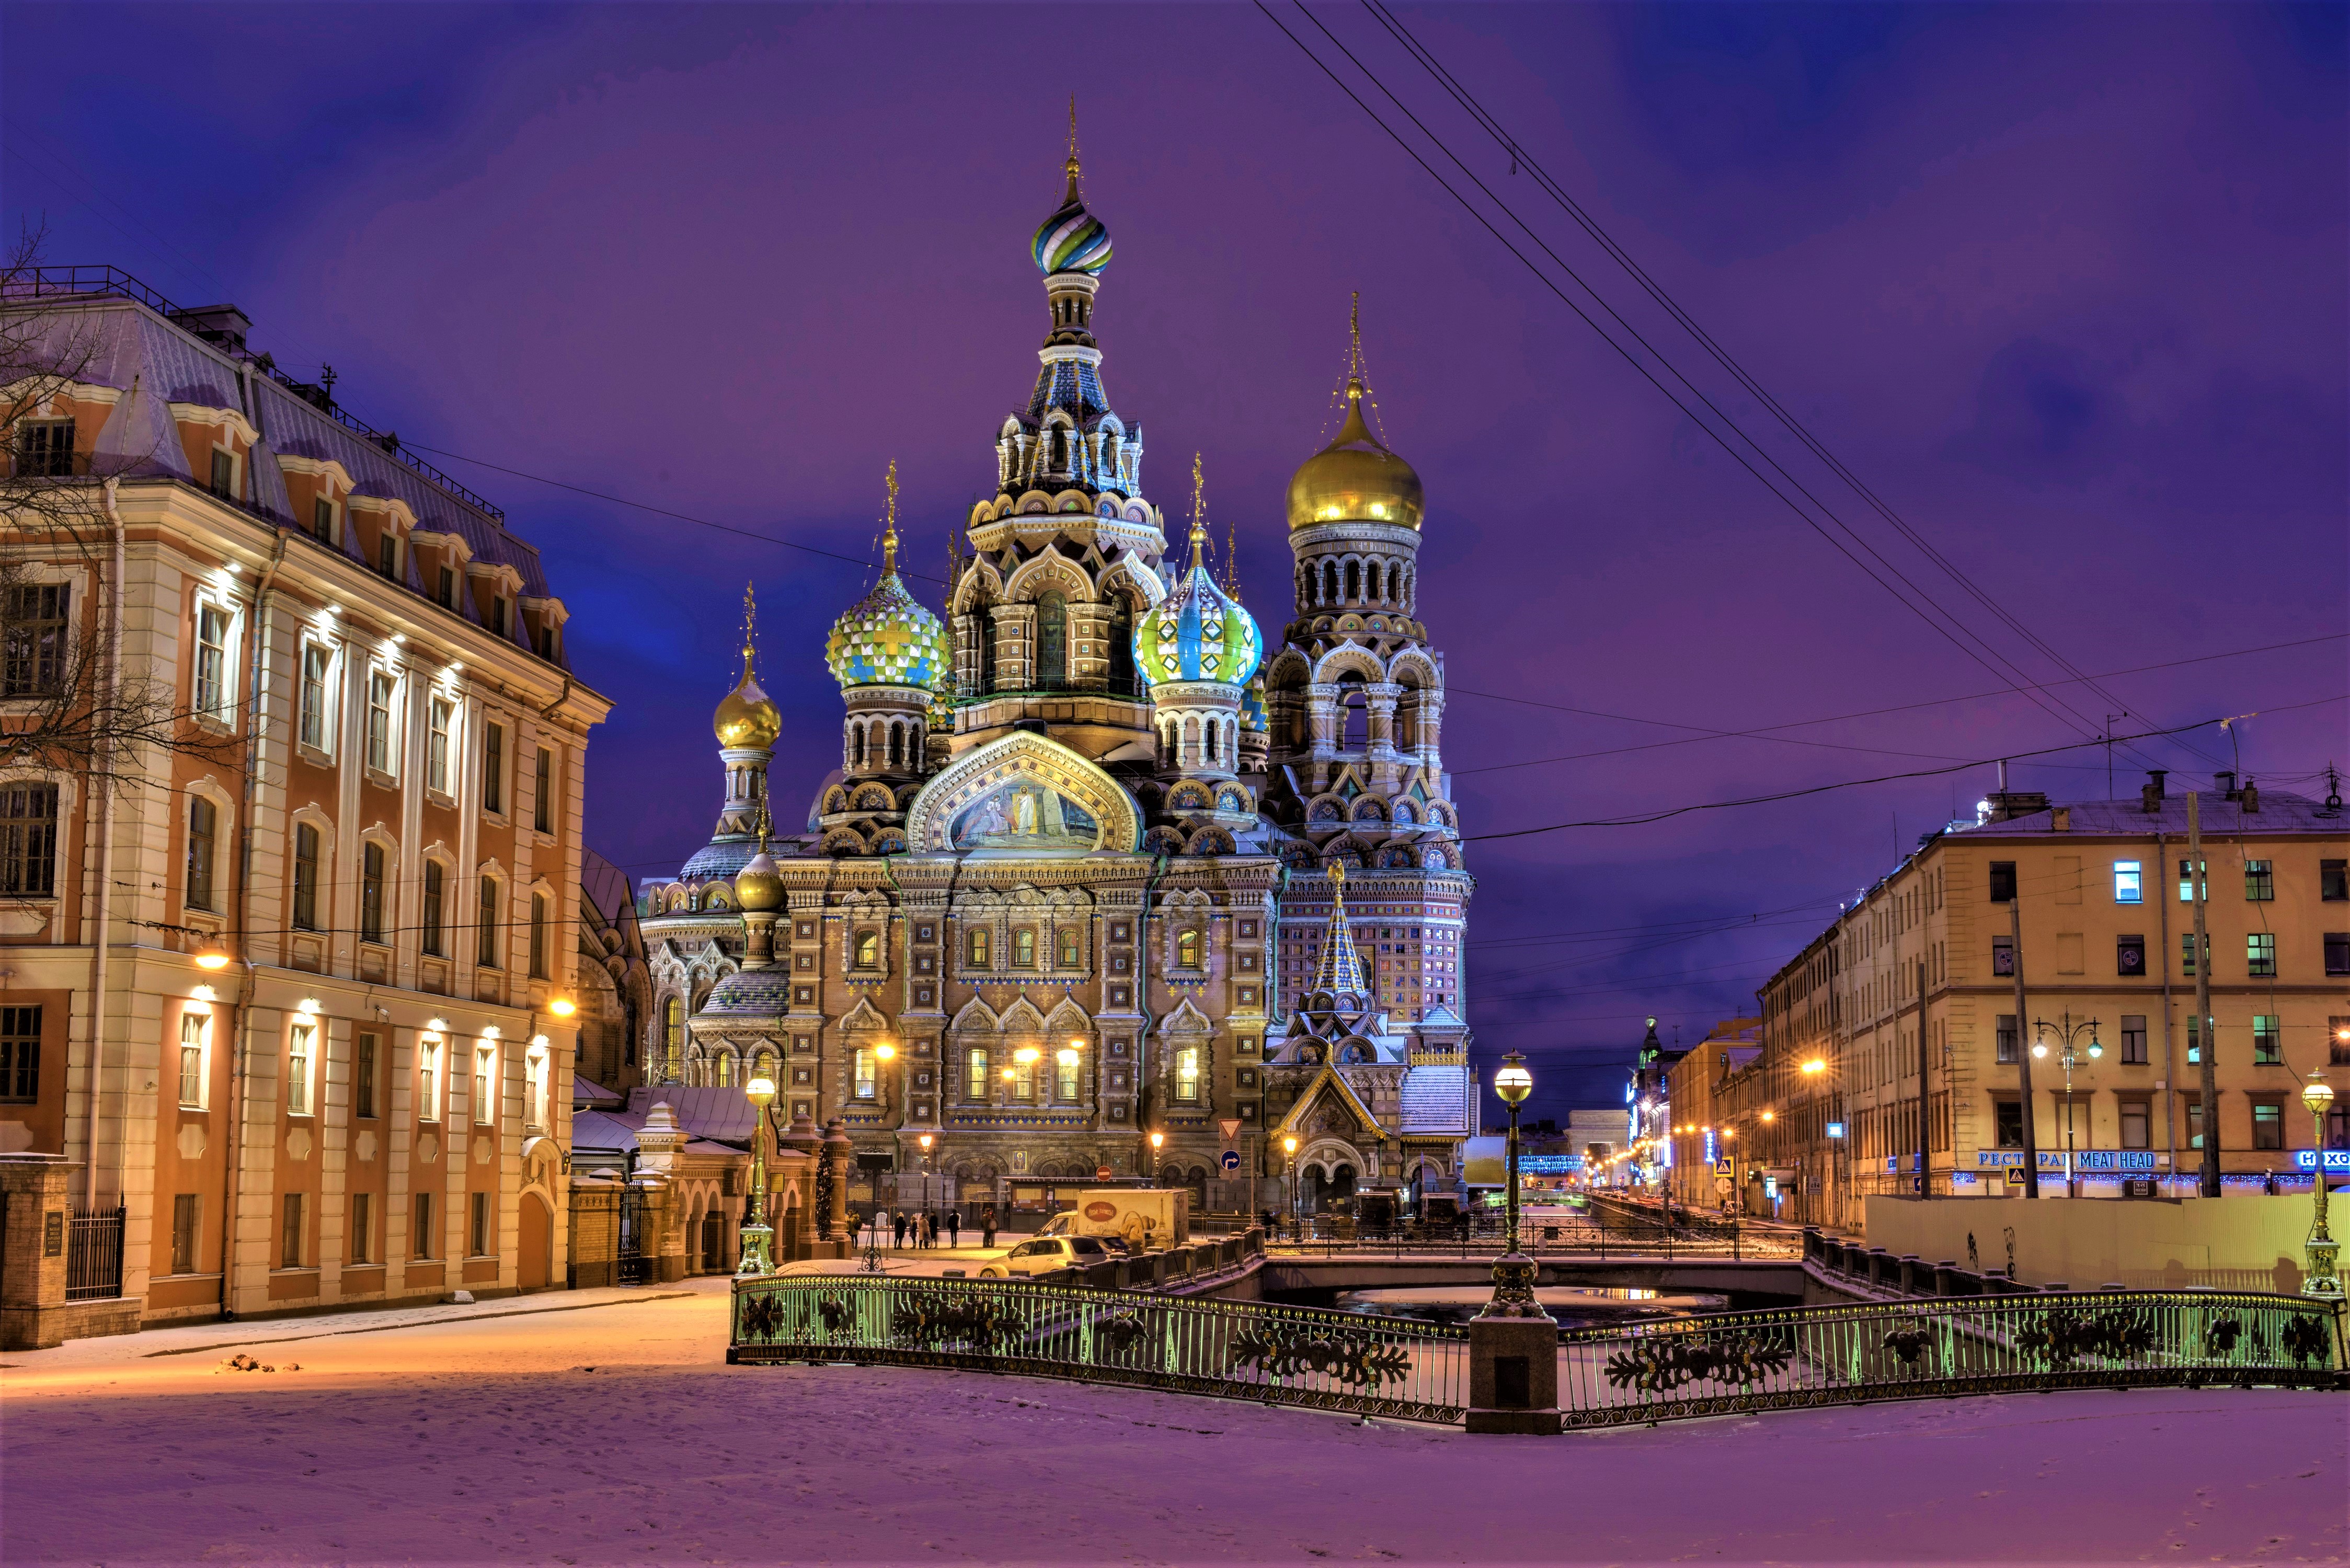 man made, saint petersburg, architecture, church, russia, square, cities